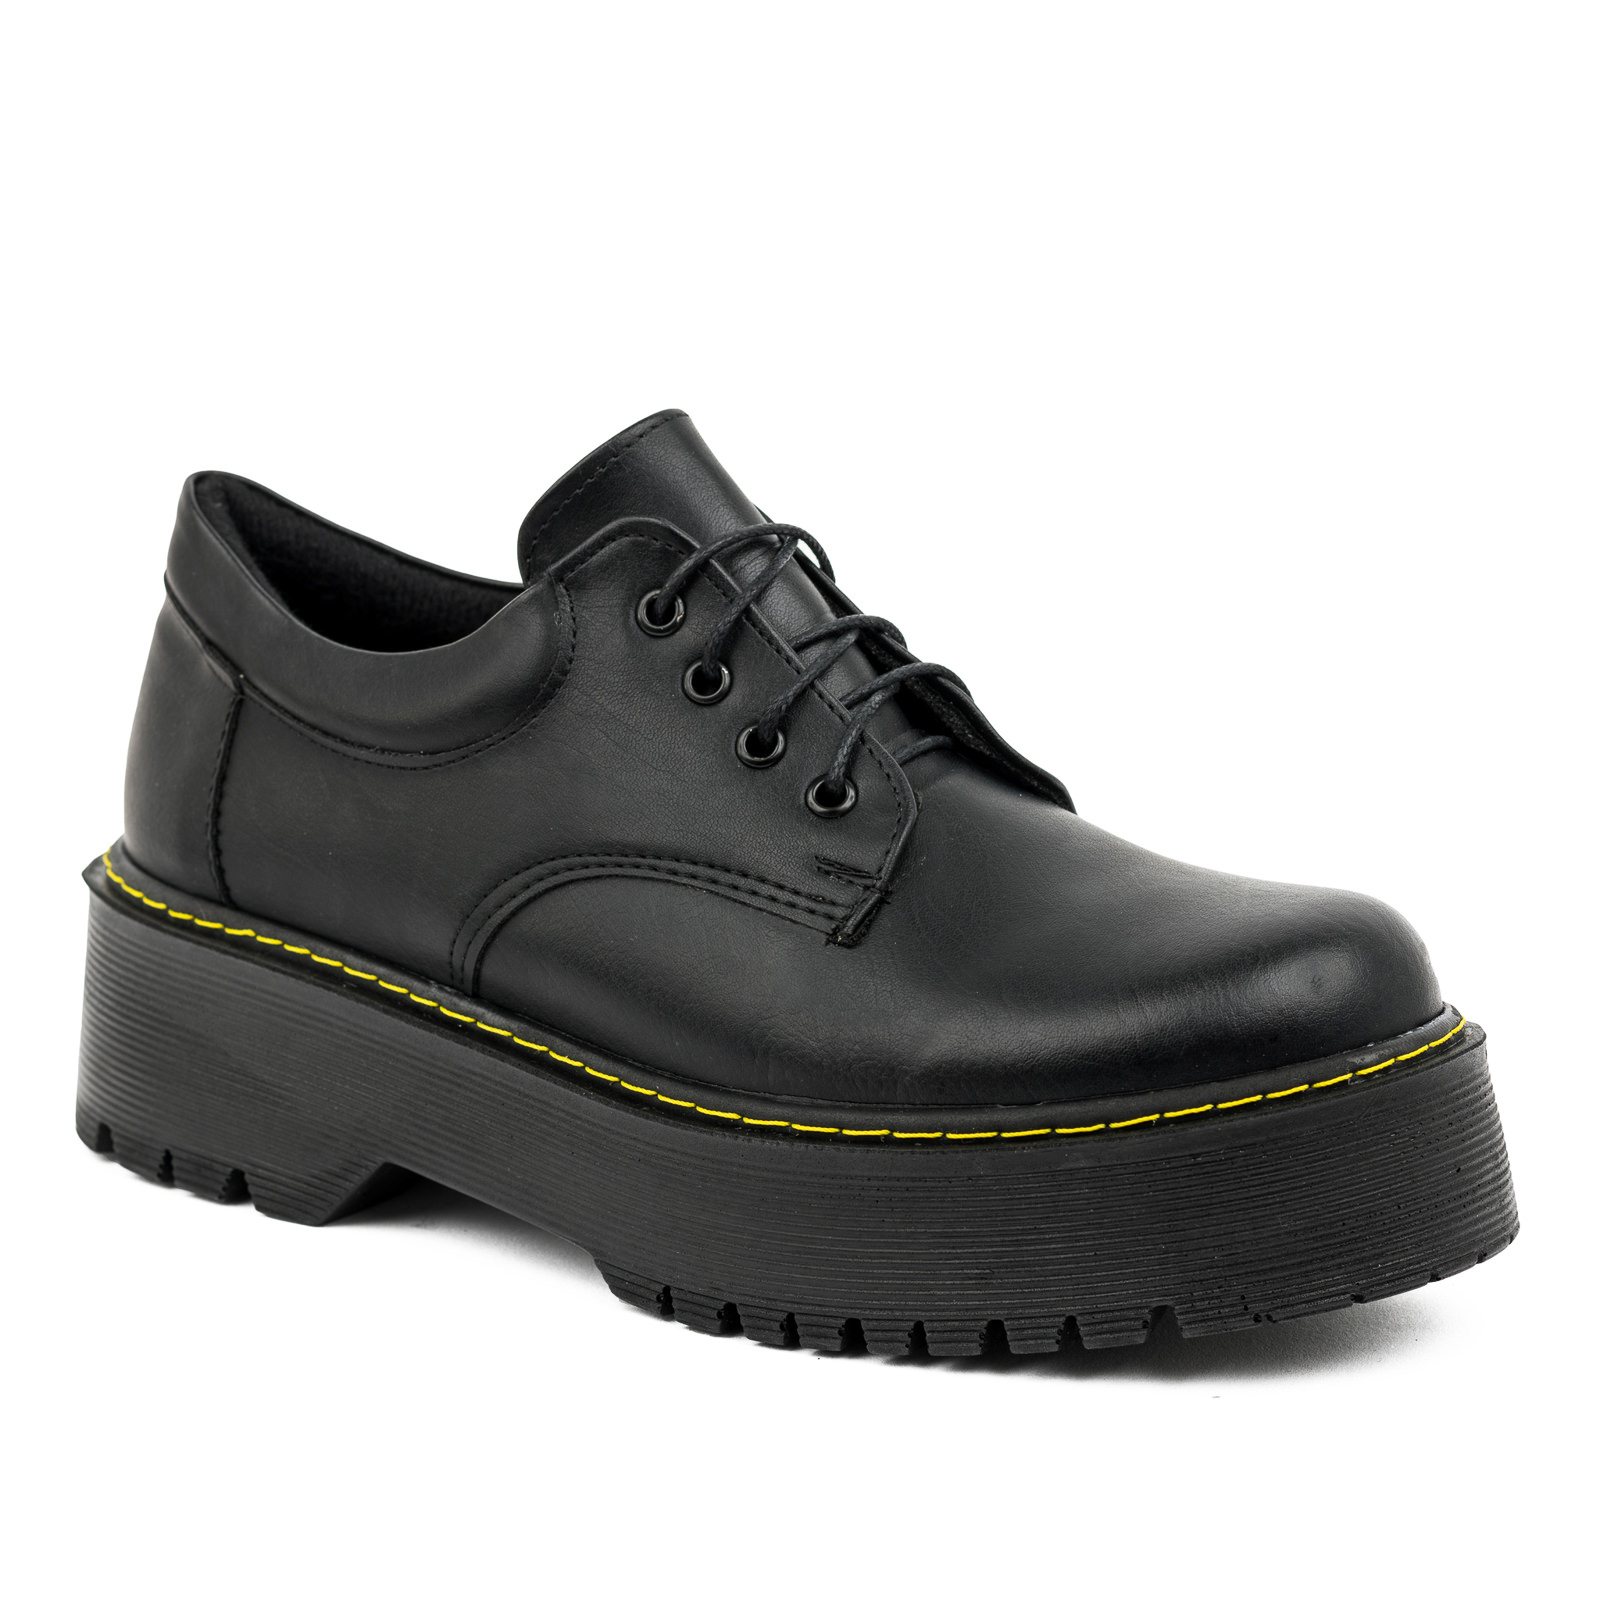 OXFORD SHOES WITH YELLOW SEAM - BLACK